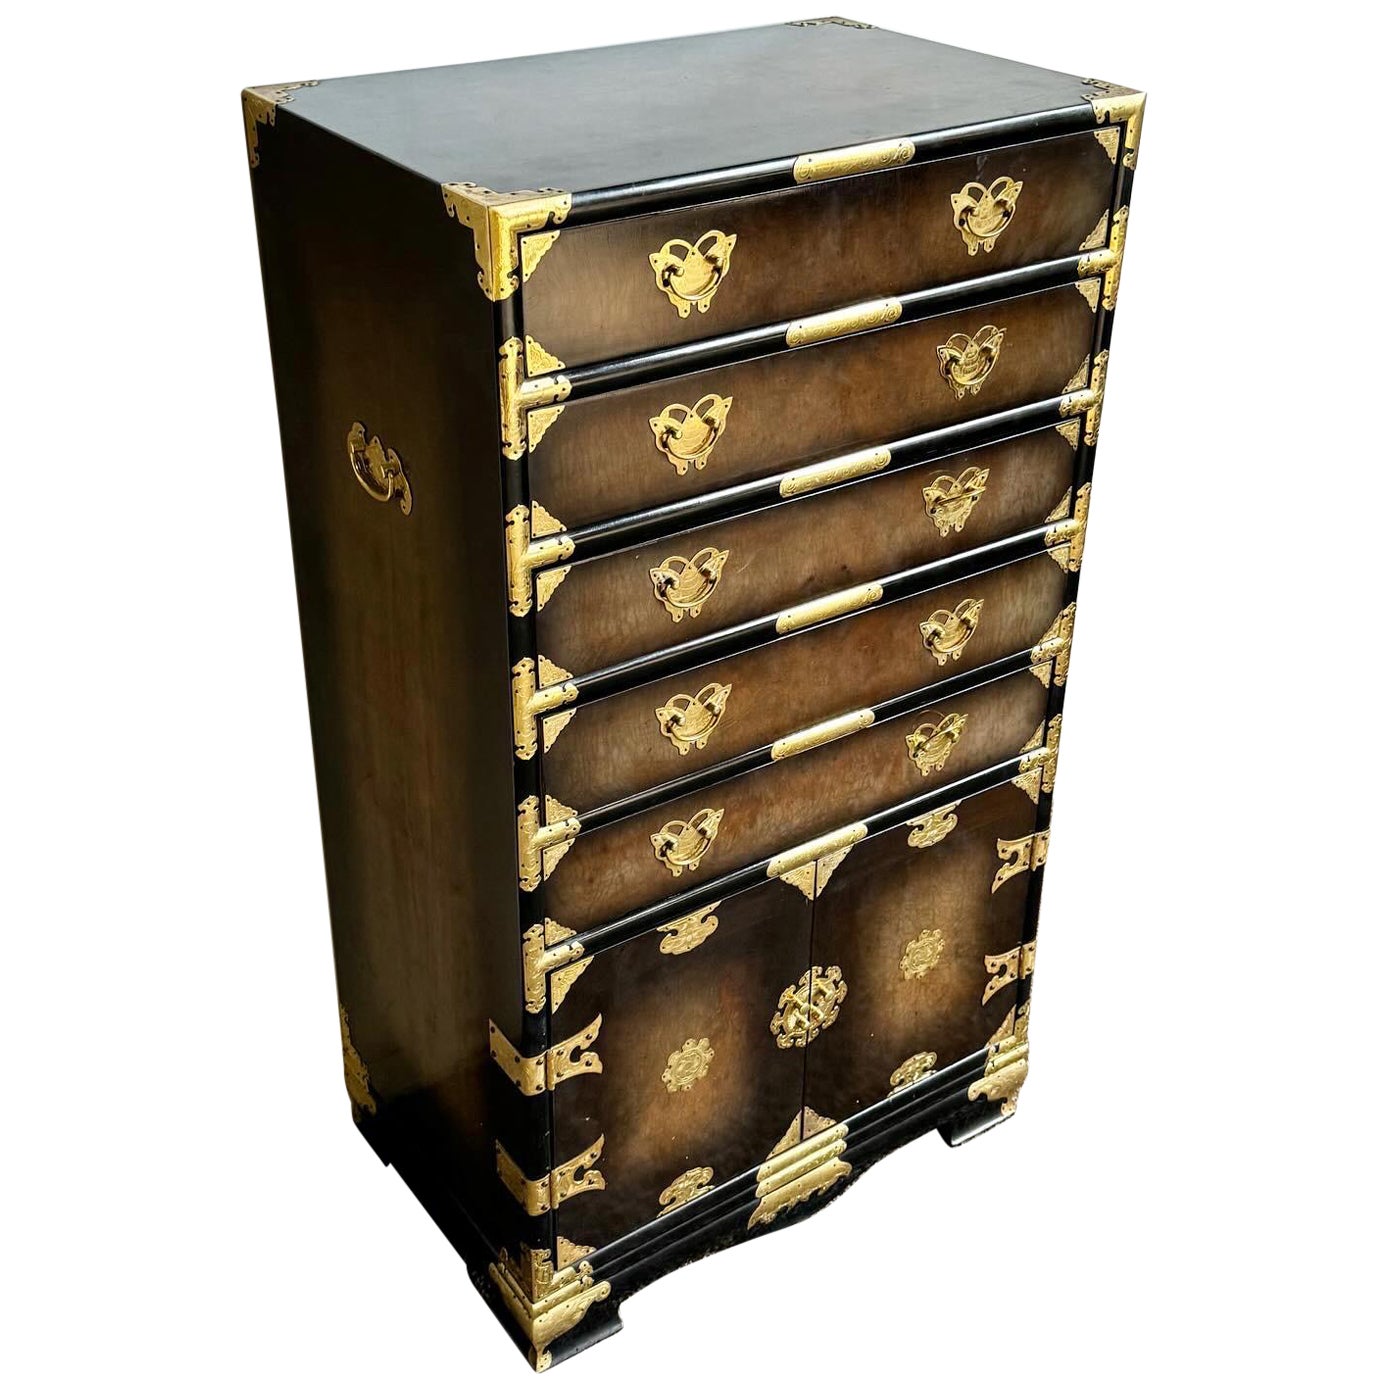 Chinoiserie Jewelry Armoire With Gold Accents 5 Drawers